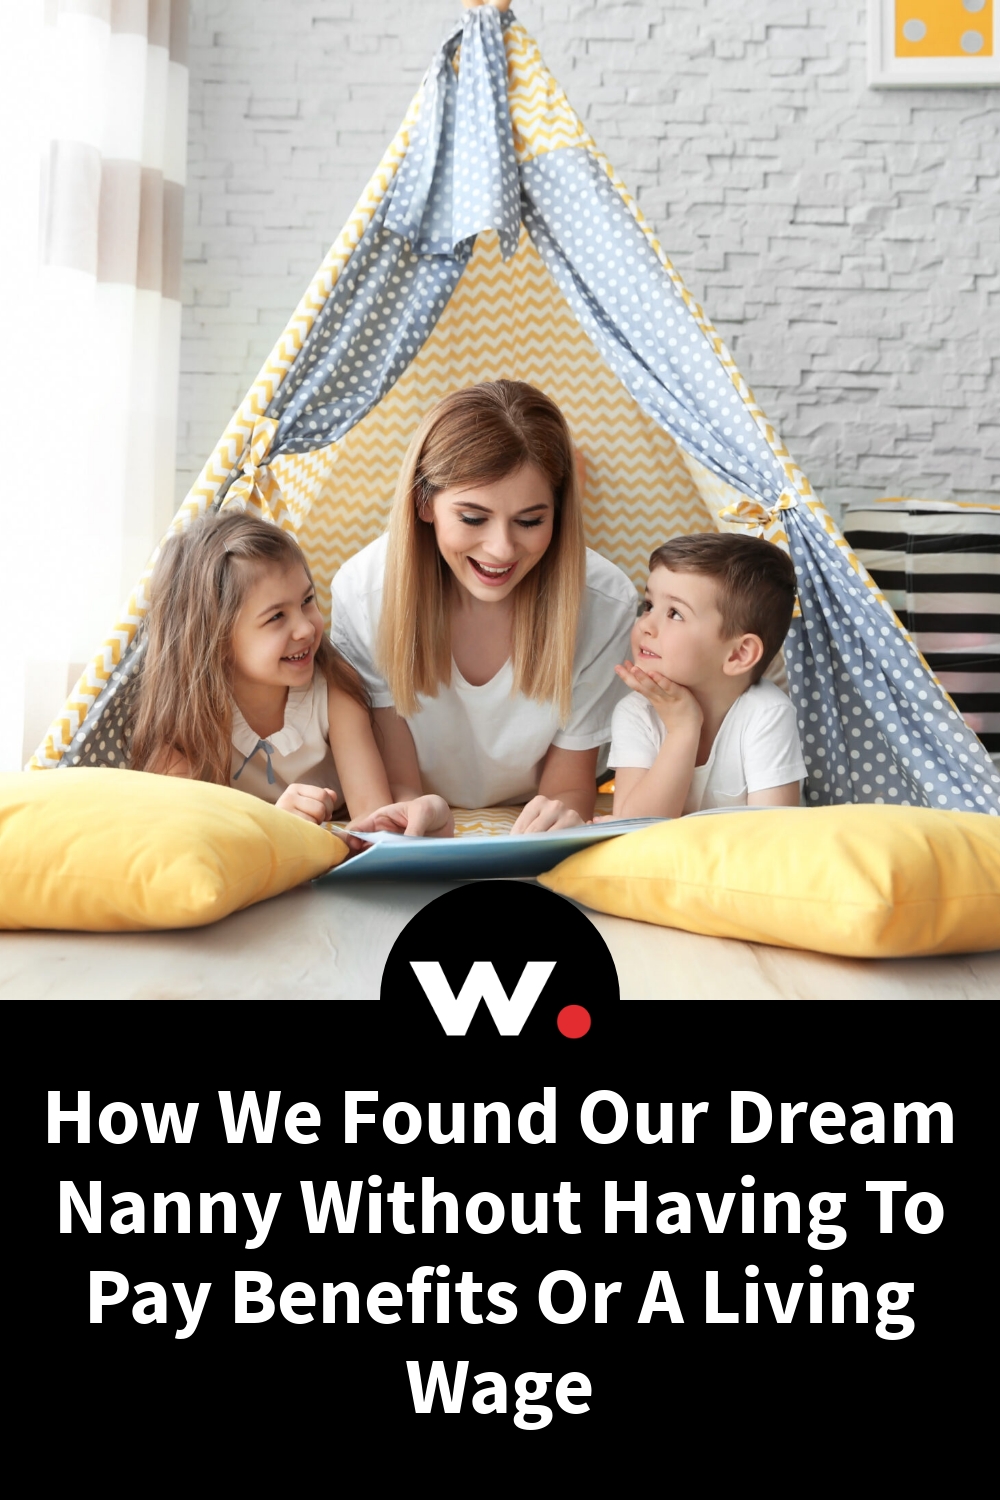 How We Found Our Dream Nanny Without Having To Pay Benefits Or A Living Wage